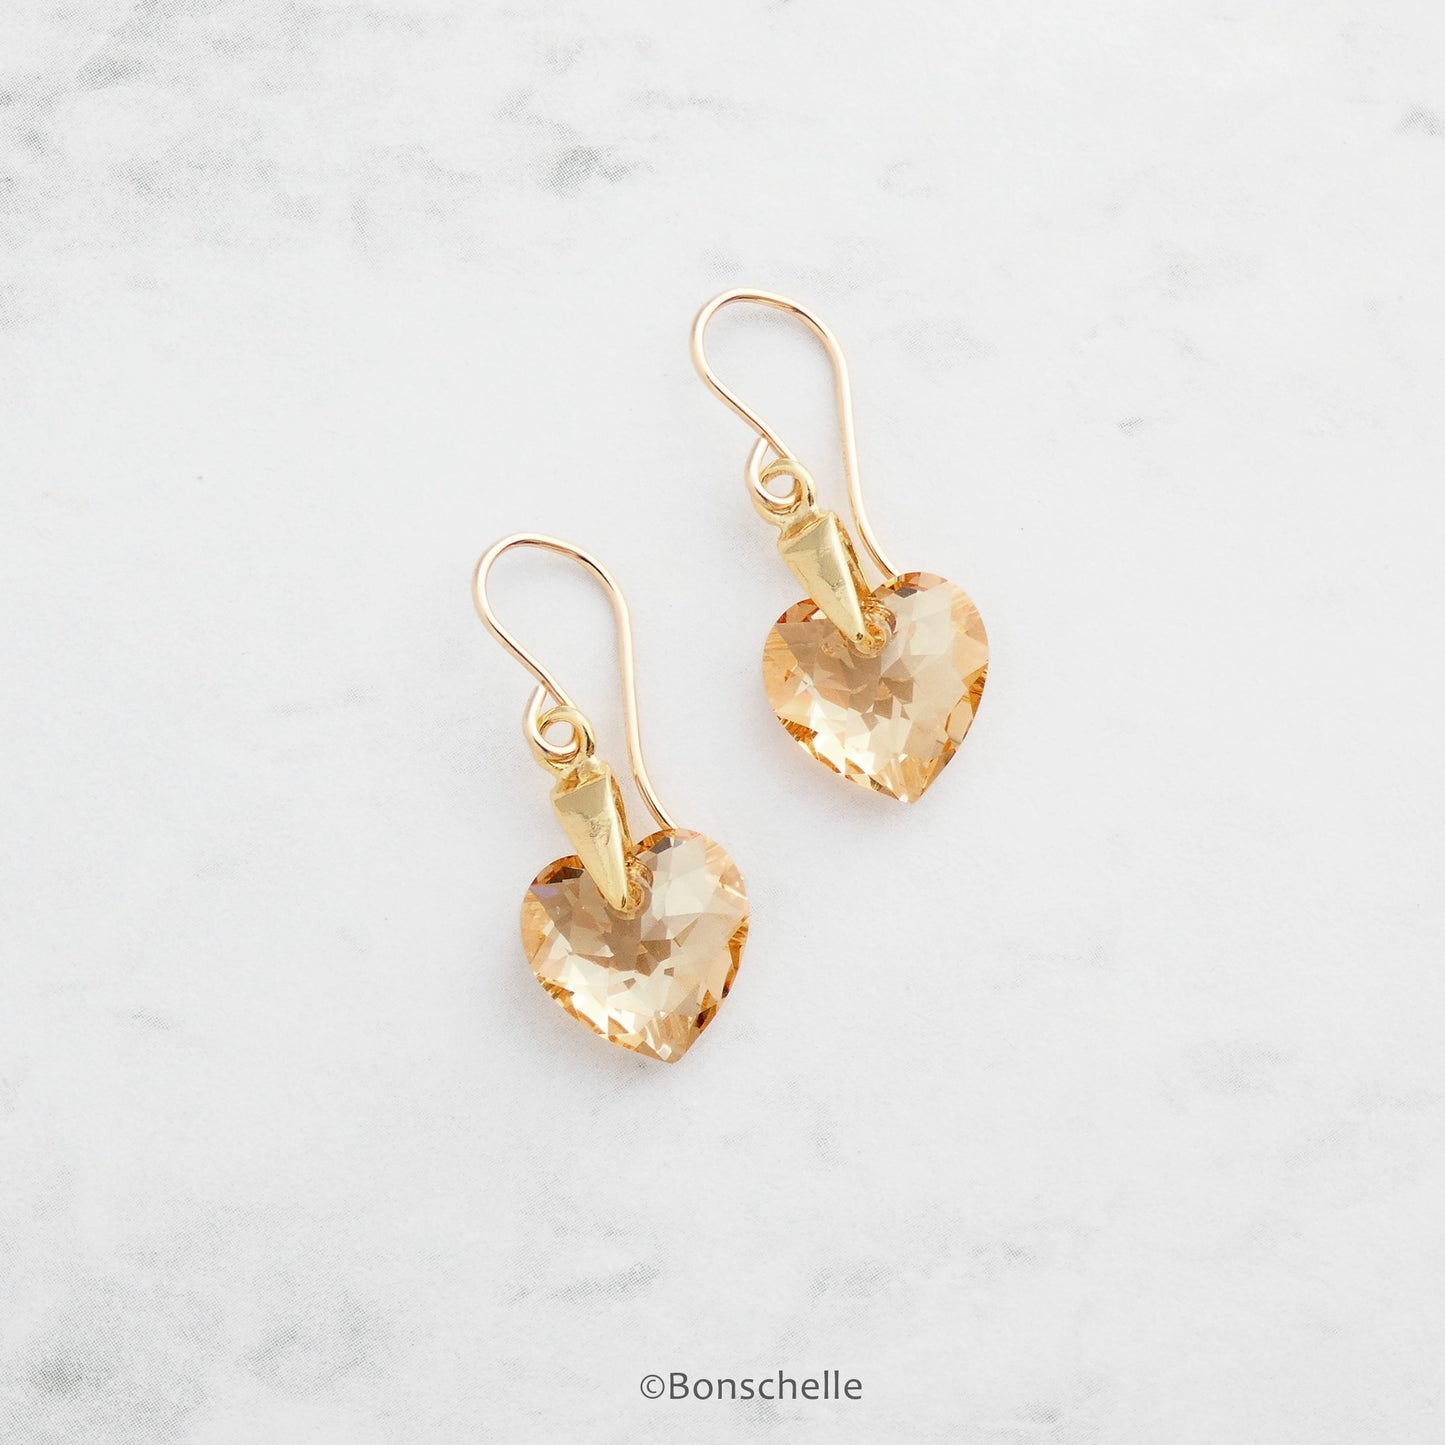 alternative view of Handmade earrings with pale golden bronze toned Swarovski crystal heart earrings and 14K gold filled earwires 